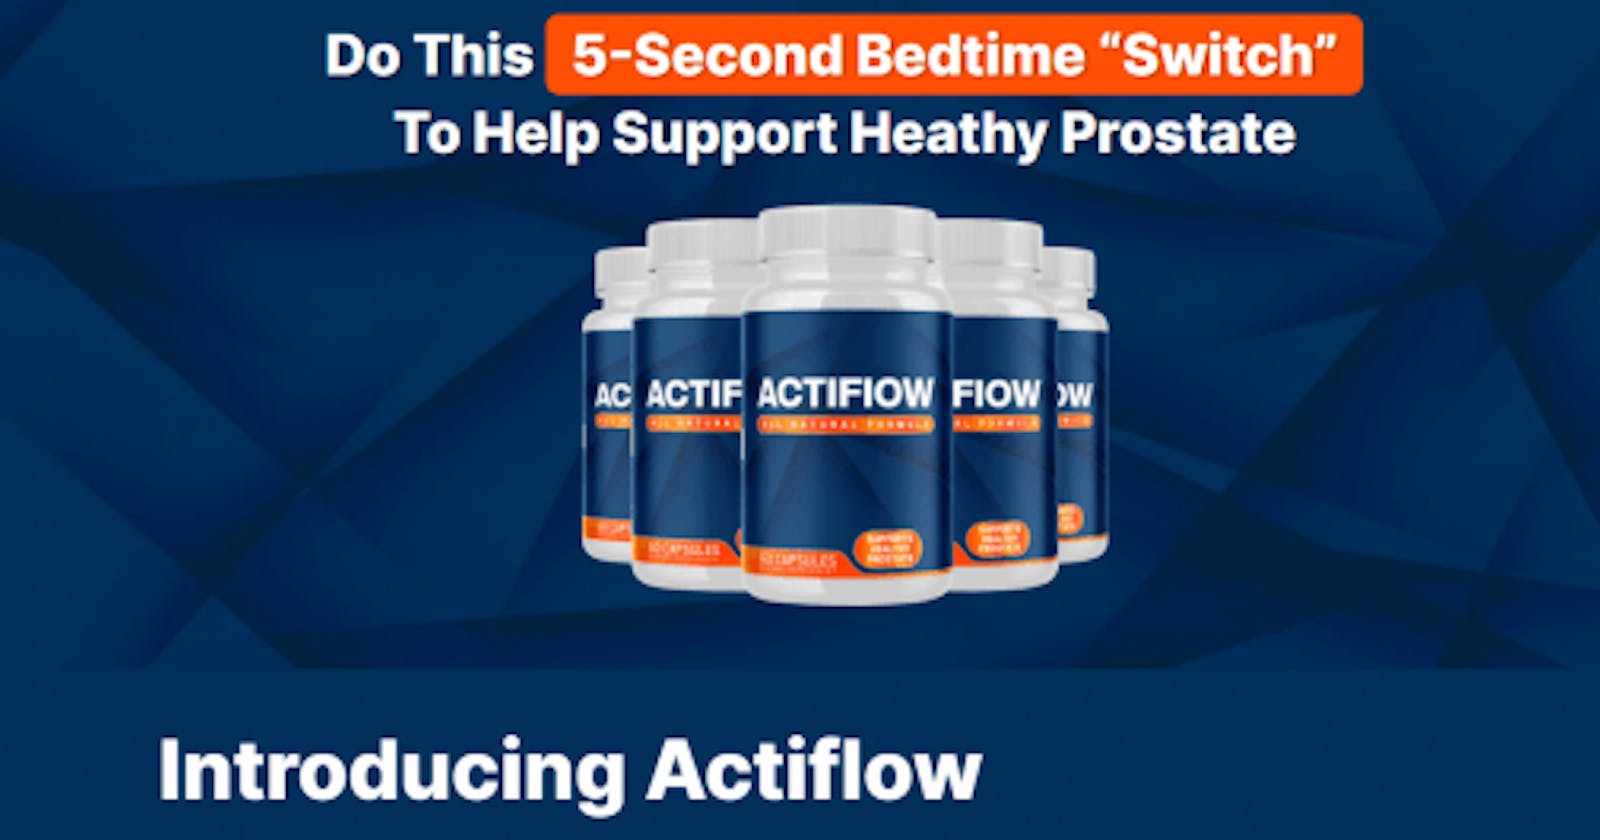 ACTIFLOW Reviews FORMULA (PROSTATE HEALTH + BLOOD FLOW ) SHOULD YOU BUY OR NOT!